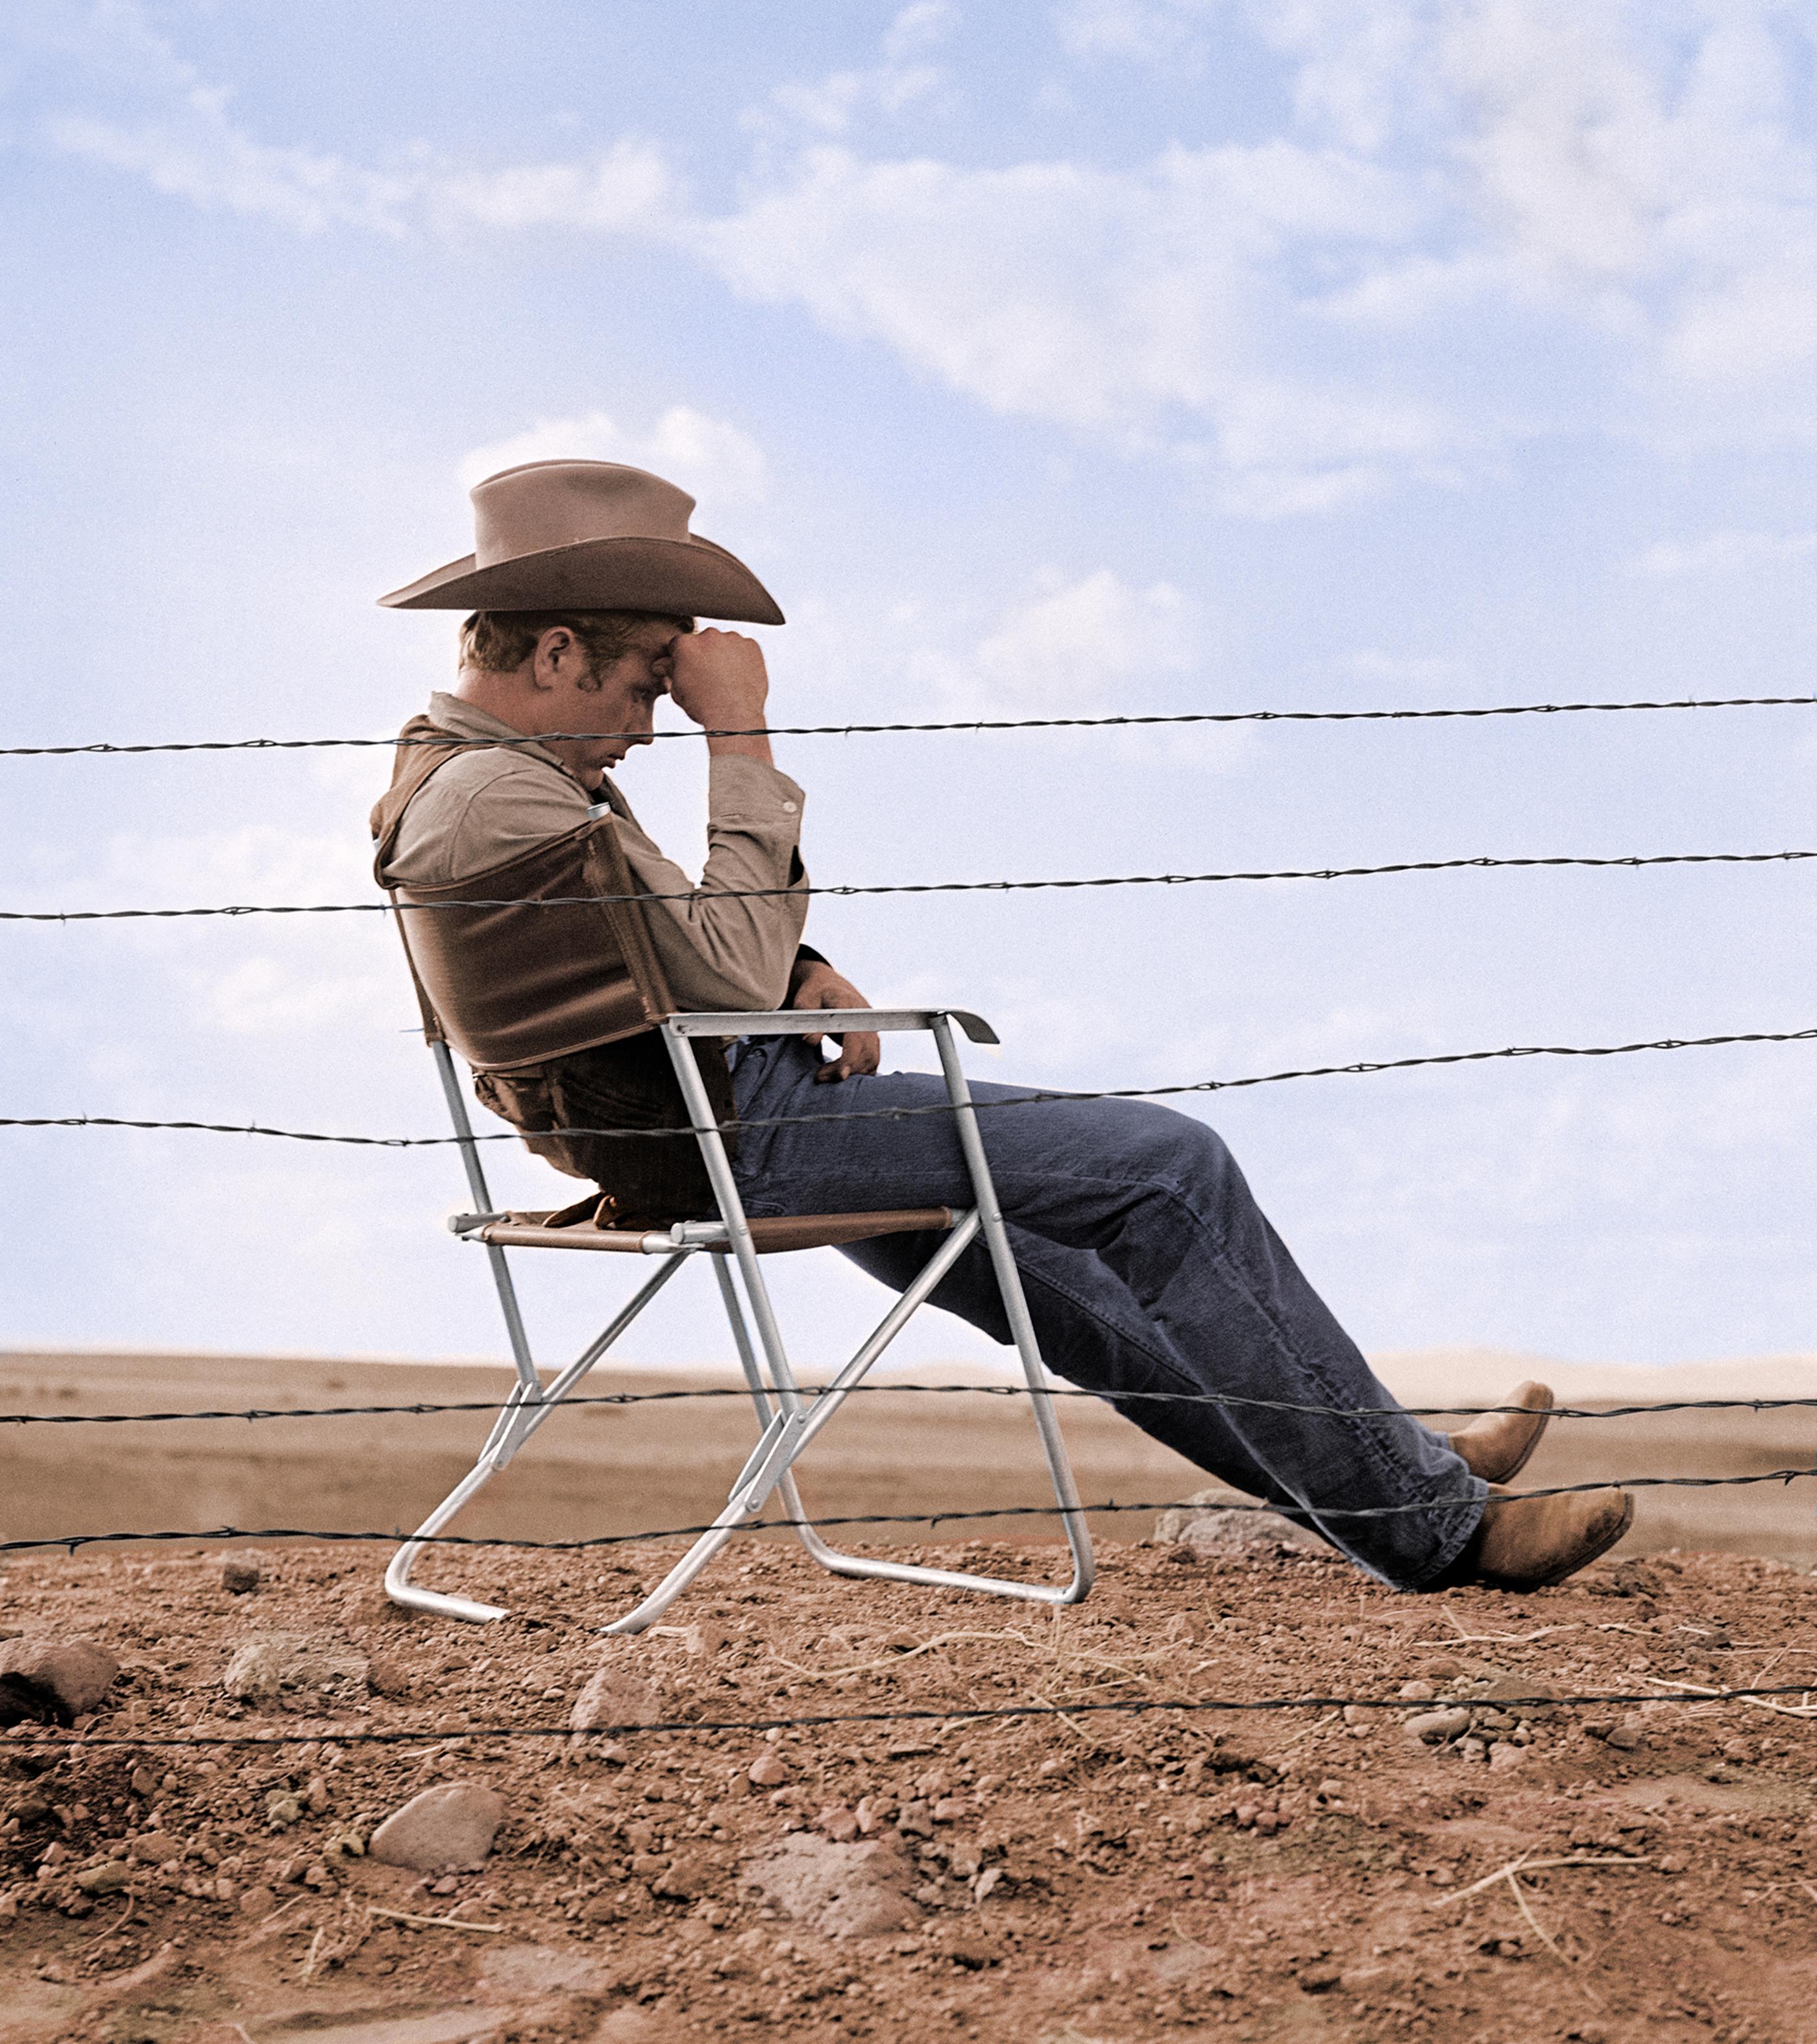 Frank Worth Color Photograph - James Dean Behind Fence in Giant 16" x 20" Edition of 125